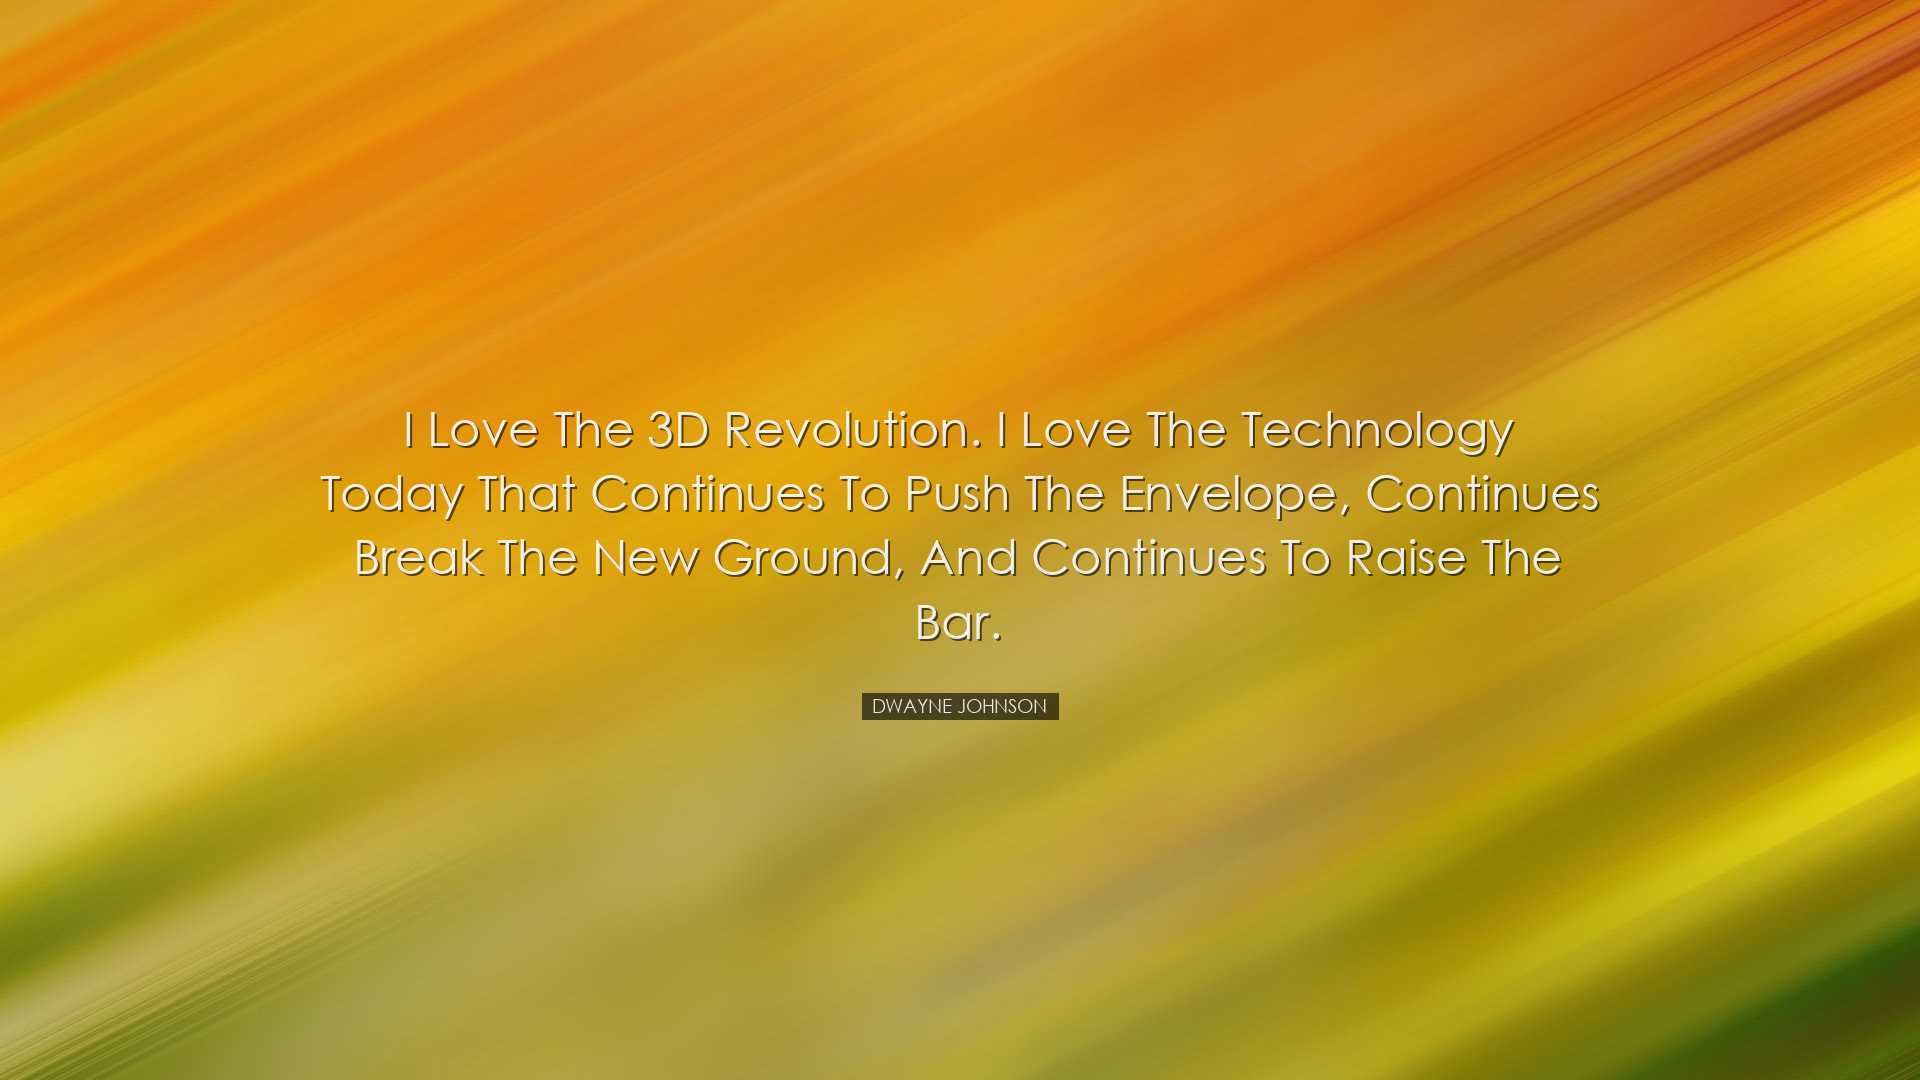 I love the 3D revolution. I love the technology today that continu